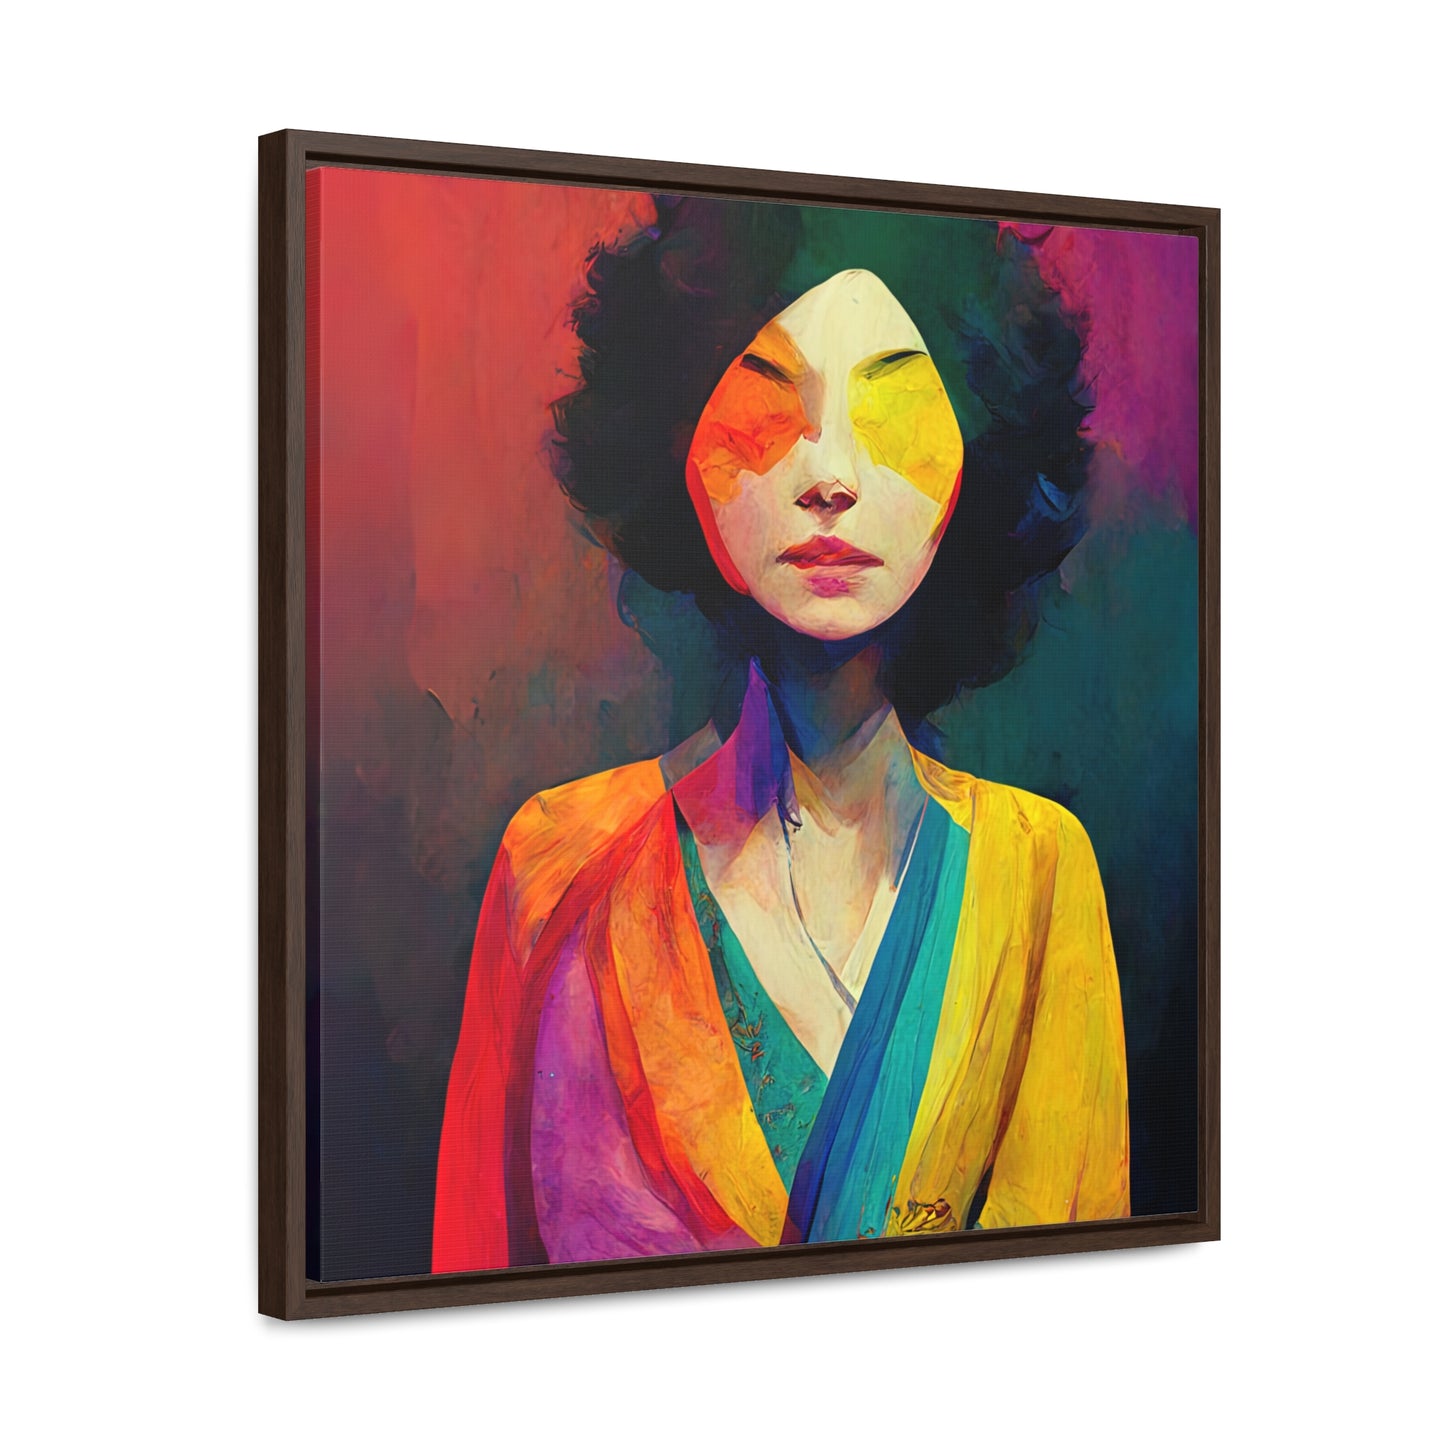 Lady's faces 13, Valentinii, Gallery Canvas Wraps, Square Frame